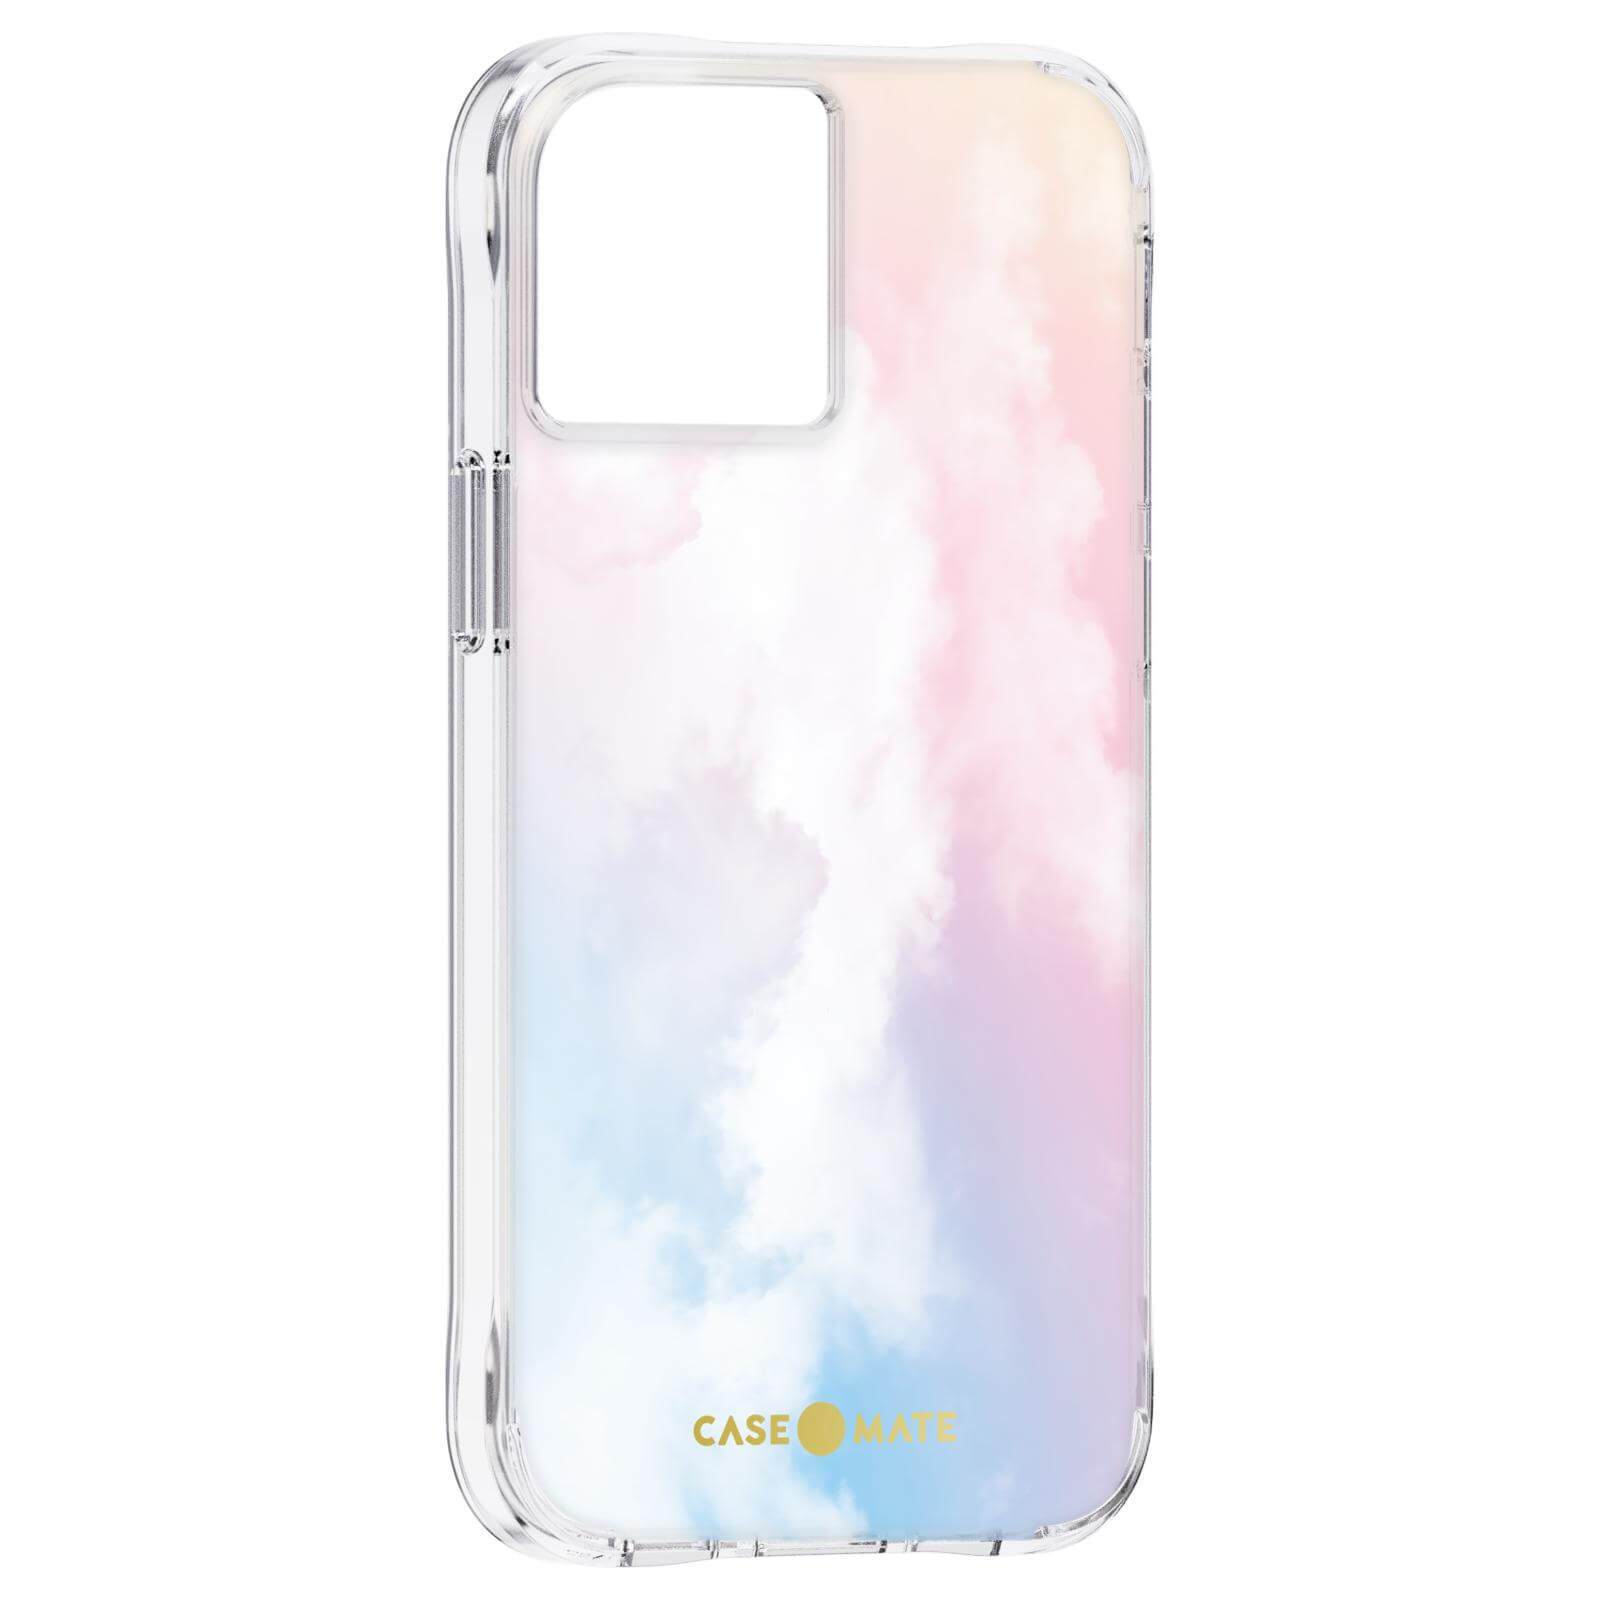 Clouds printed on case for iPhone 13 pro. color::Cloud 9